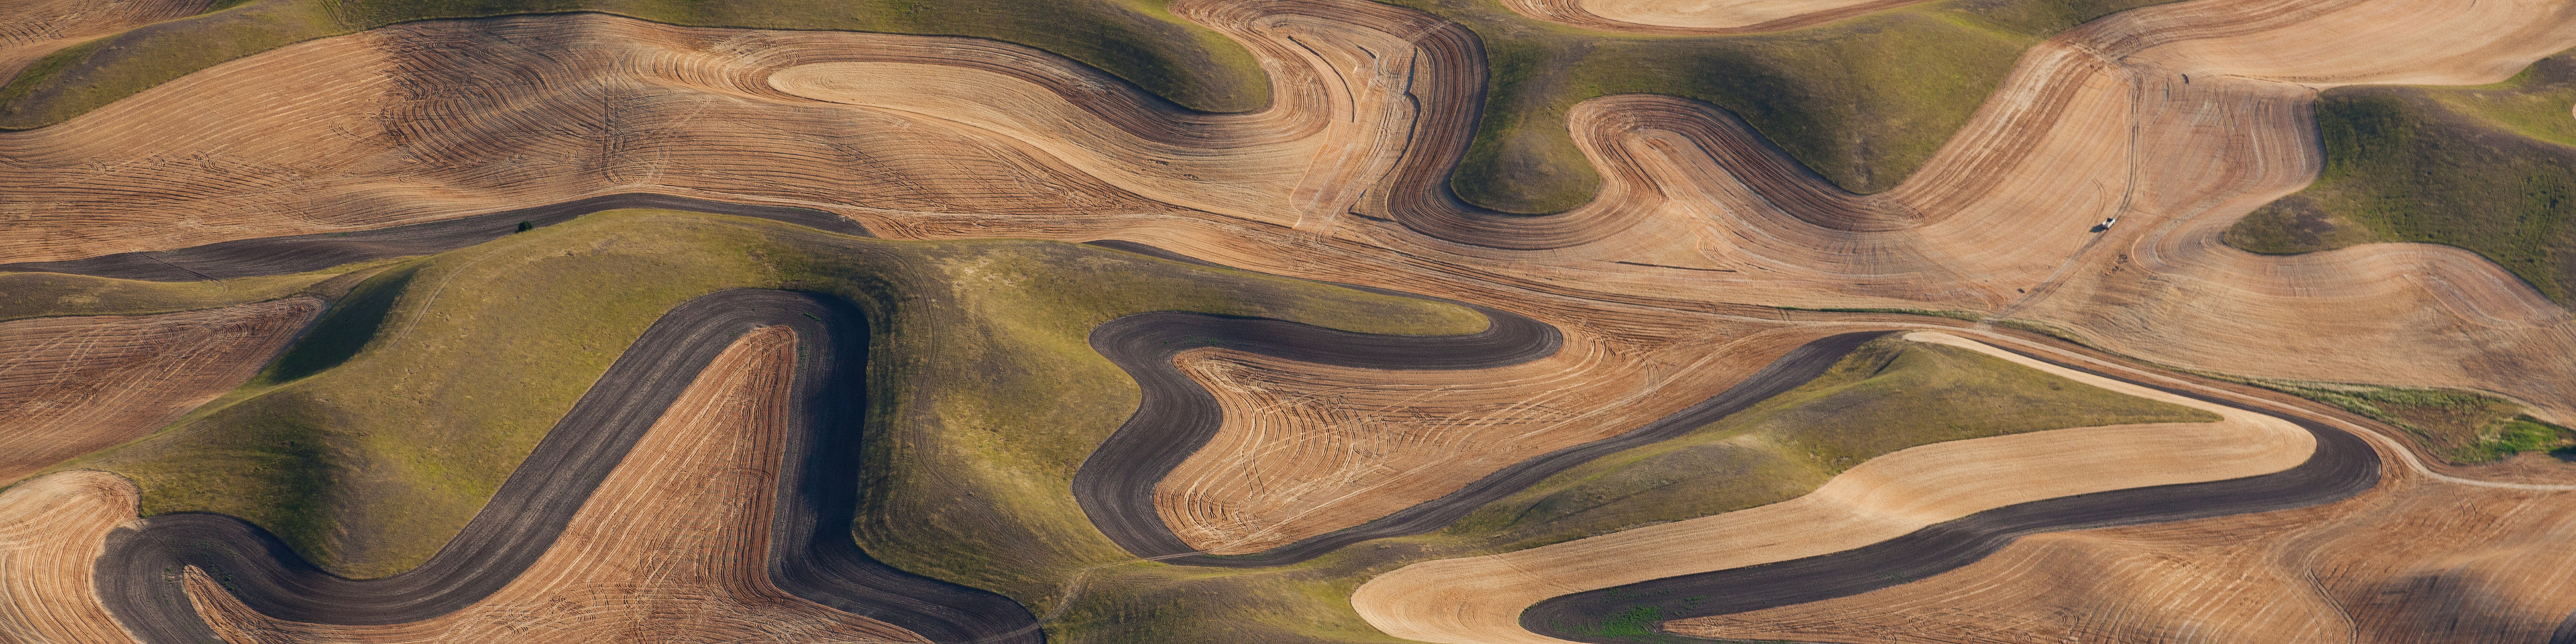 Farmland landscape, with ploughed fields and furrows in Palouse, Washington, USA. An aerial view with natural patterns,